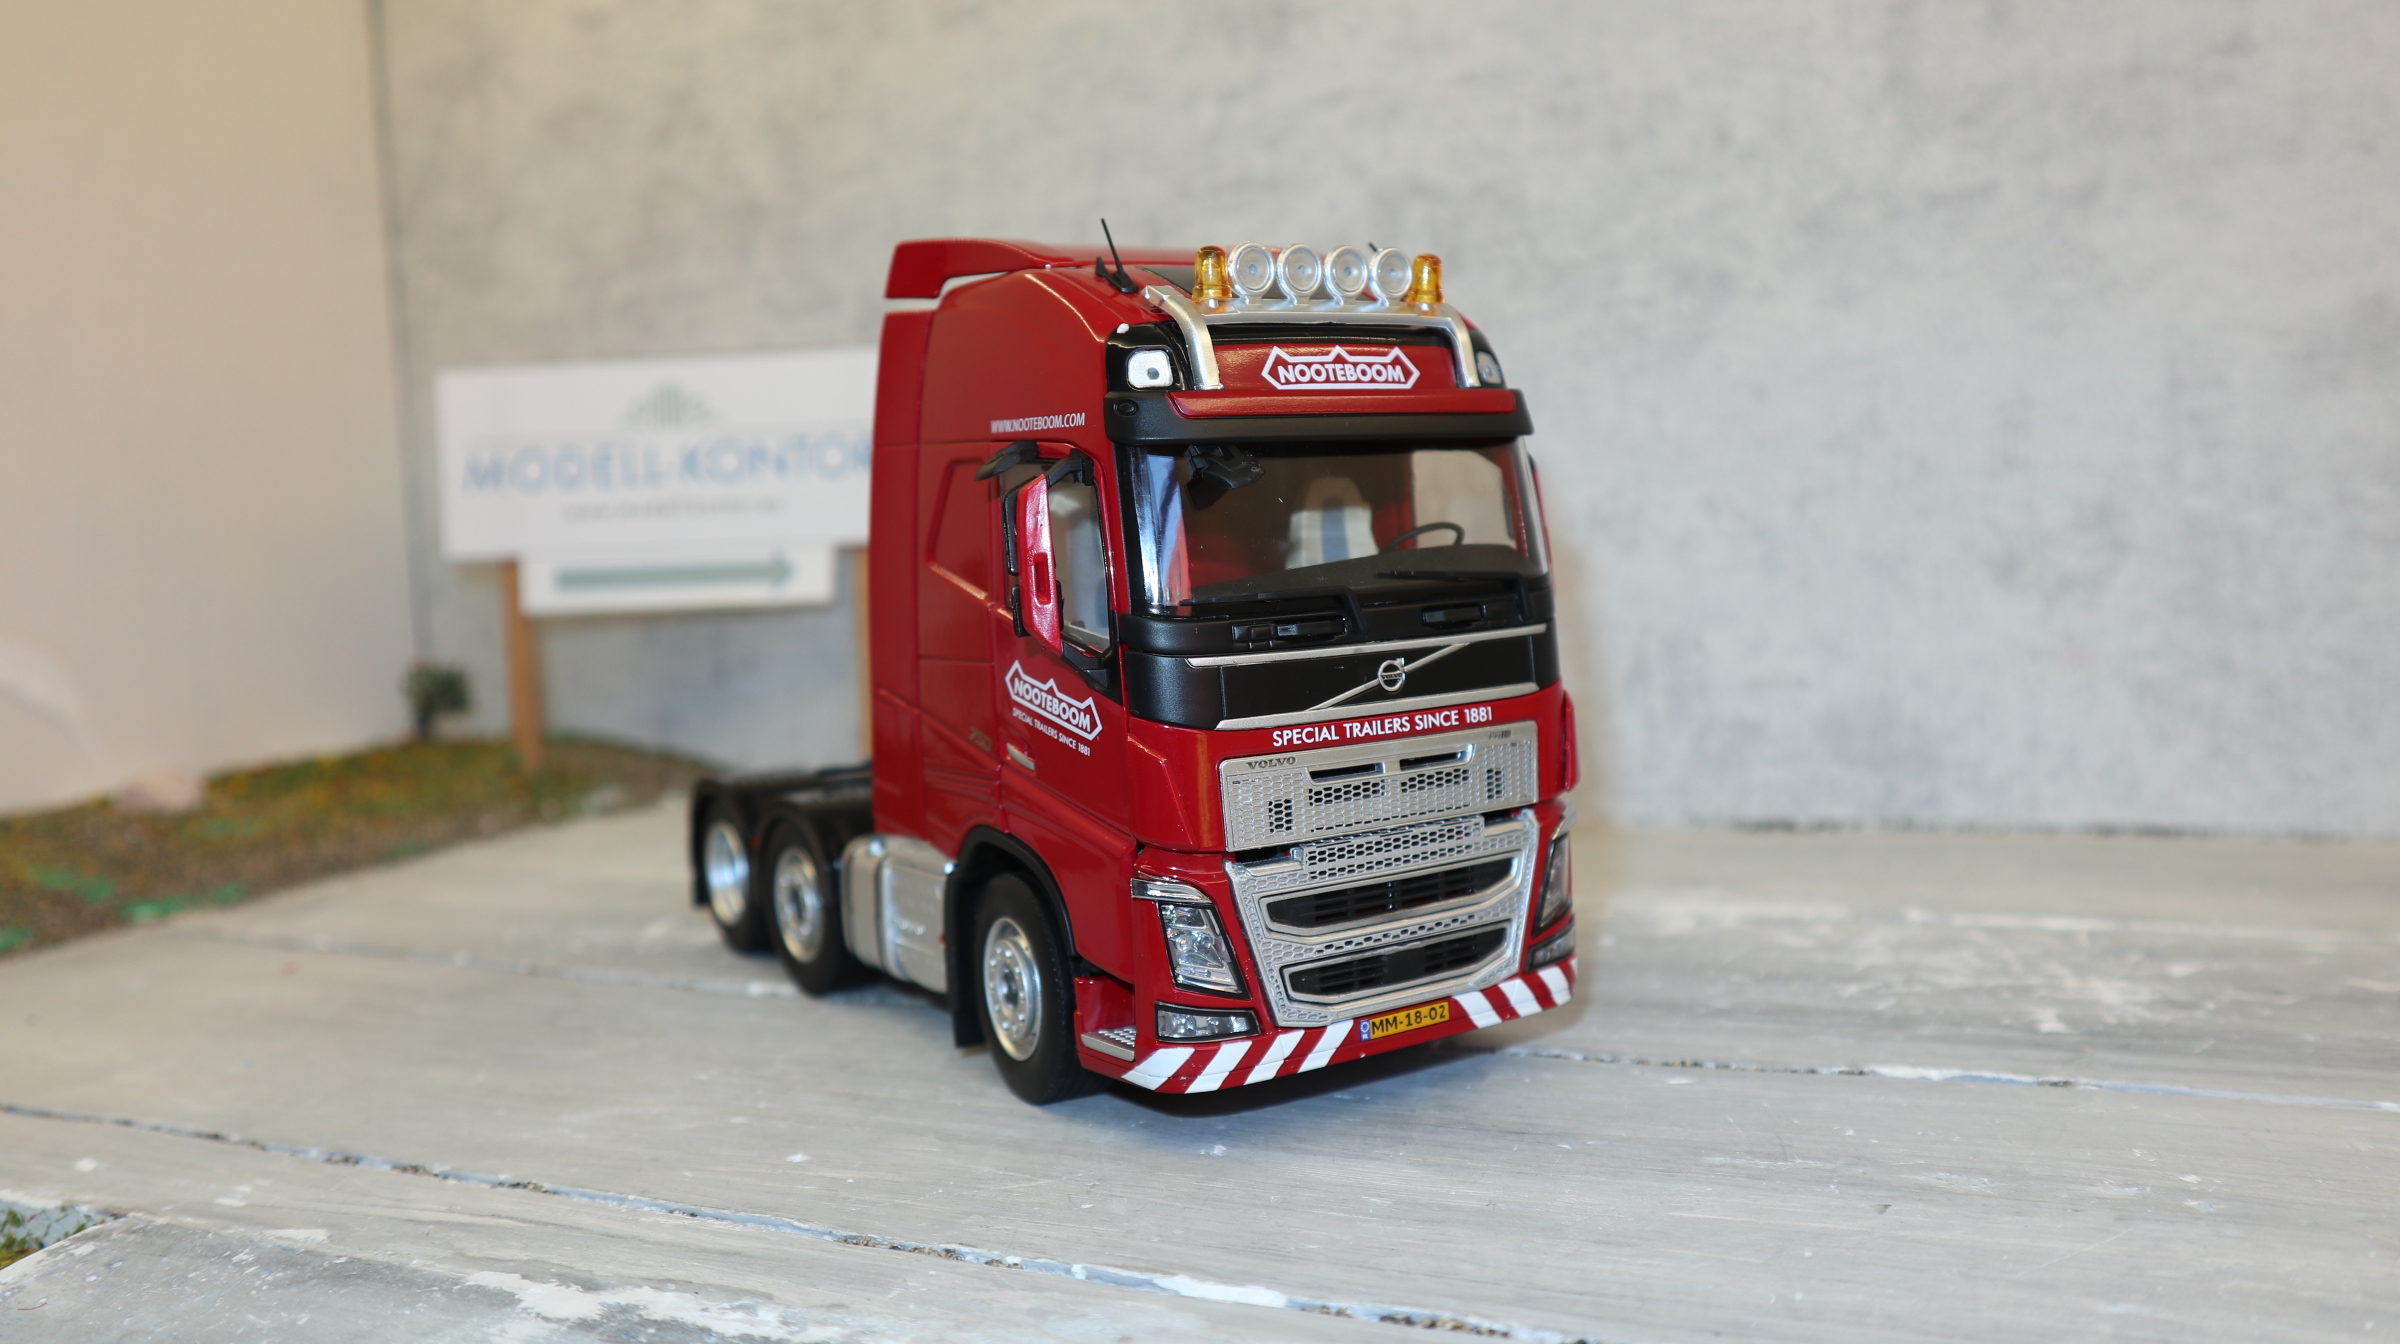 MarGe 1811-03 in 1:32, VOLVO FH 16 6x2 NOOTEBOOM, NEU in OVP